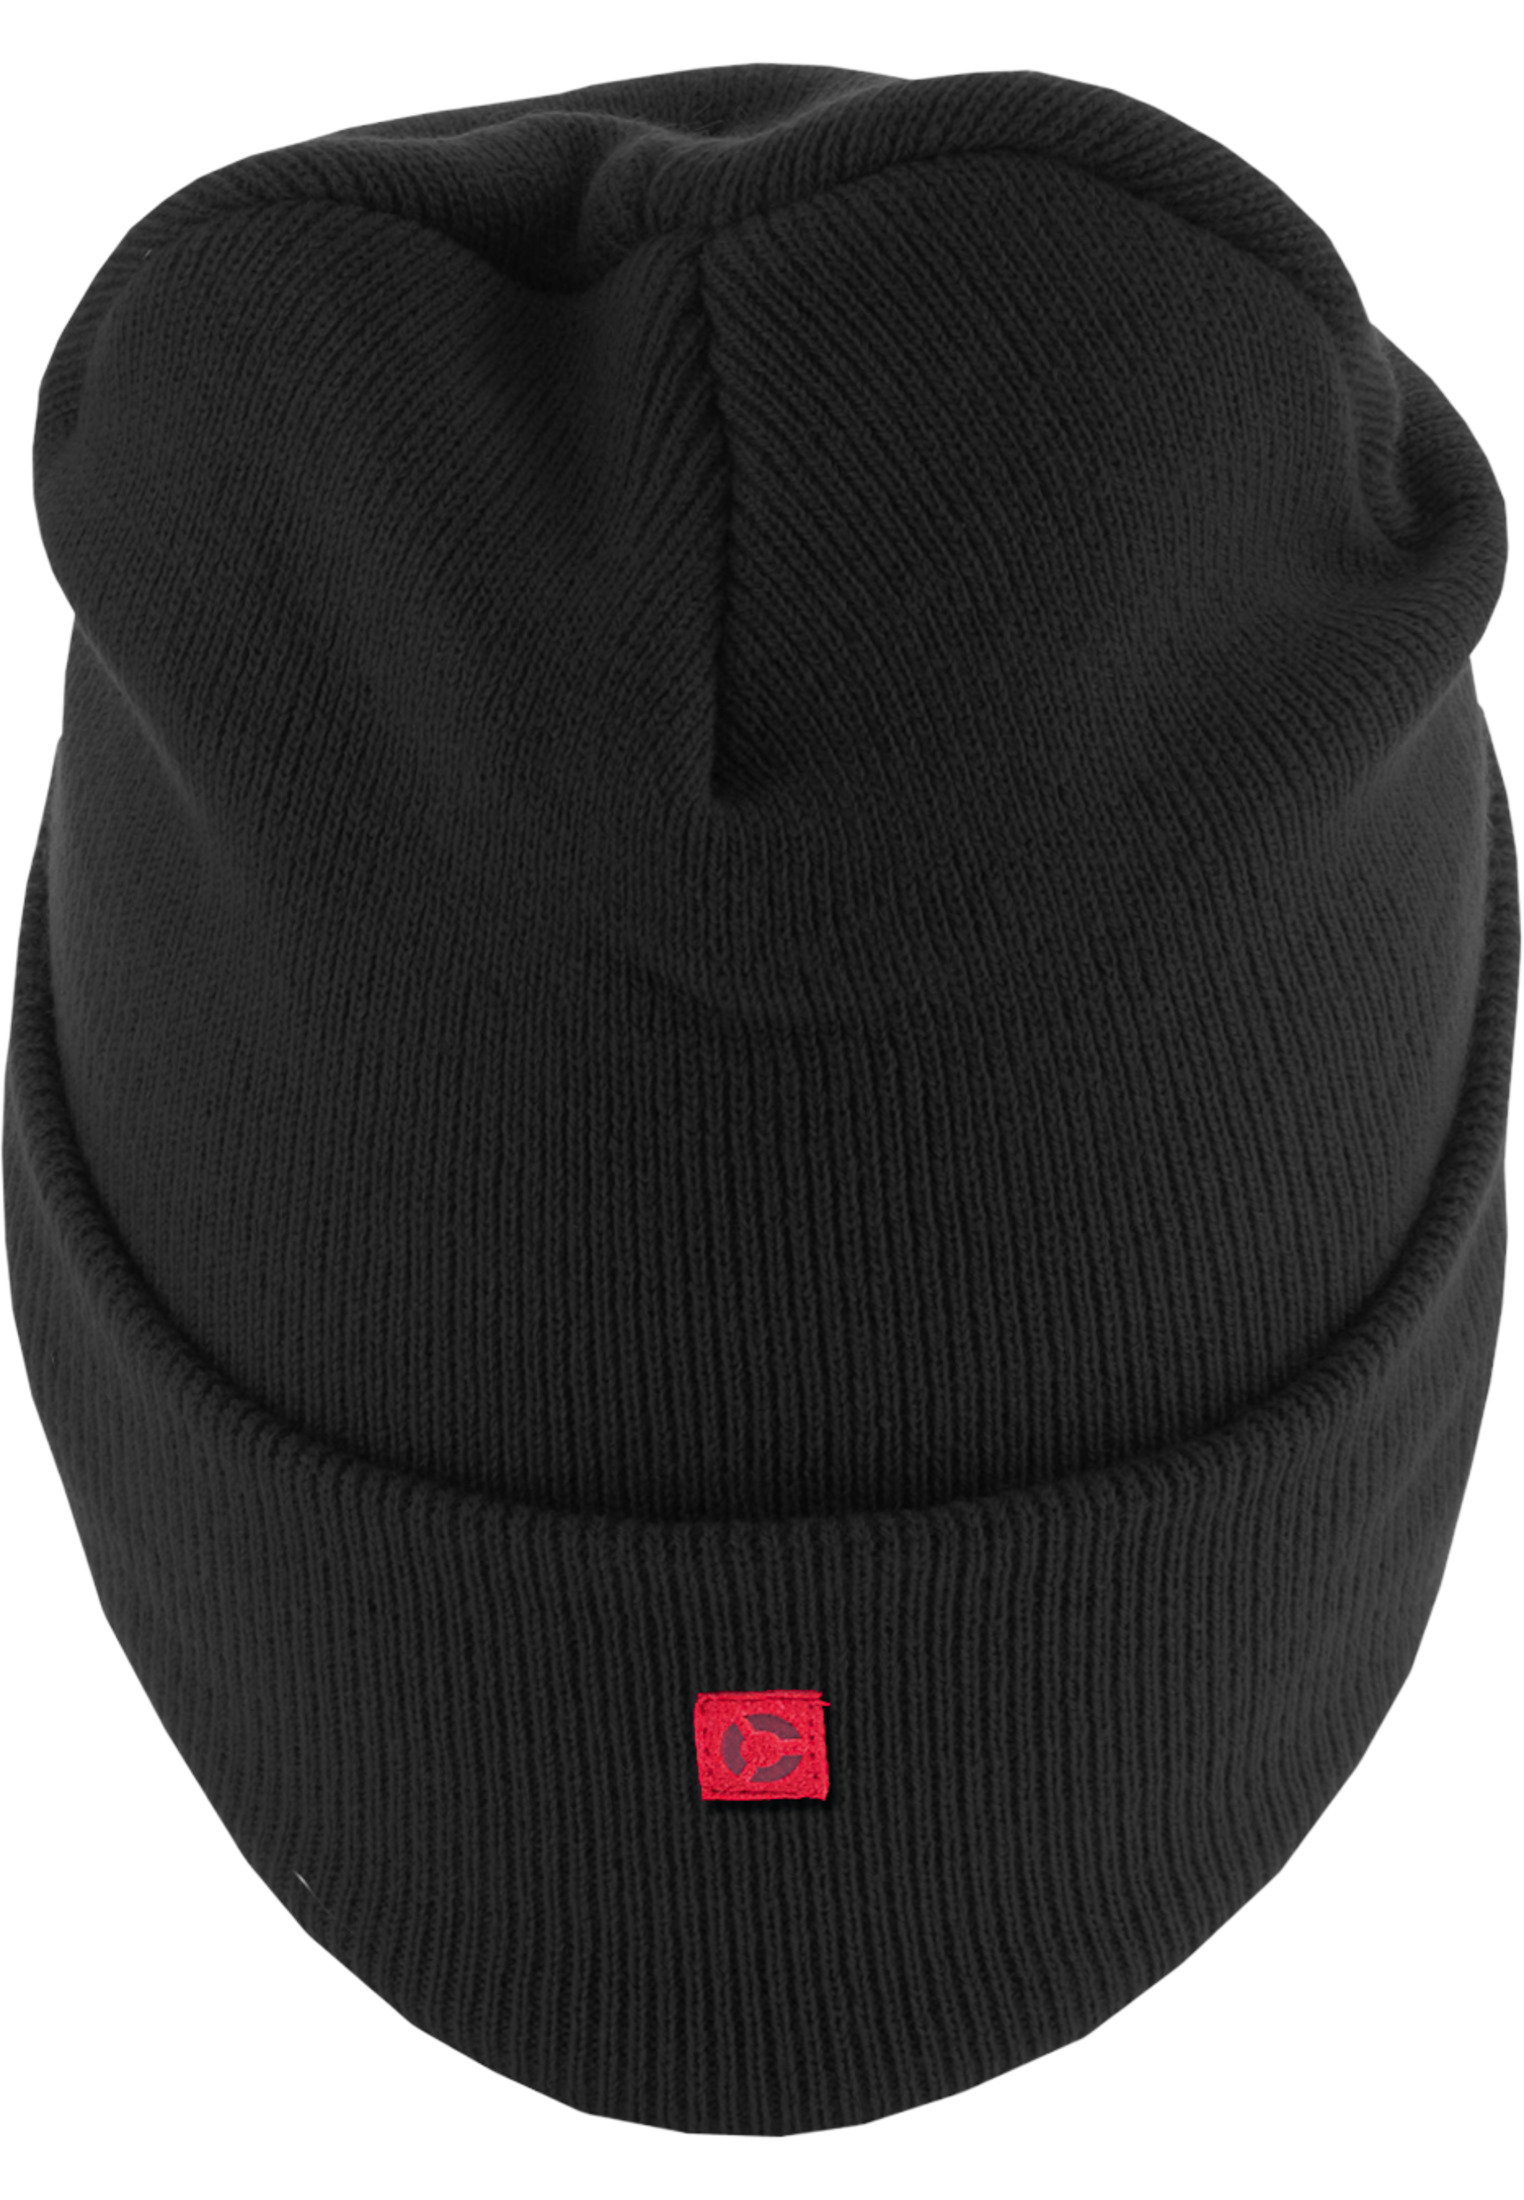 Caps & Beanies Letter Cuff Knit Beanie in Farbe Z